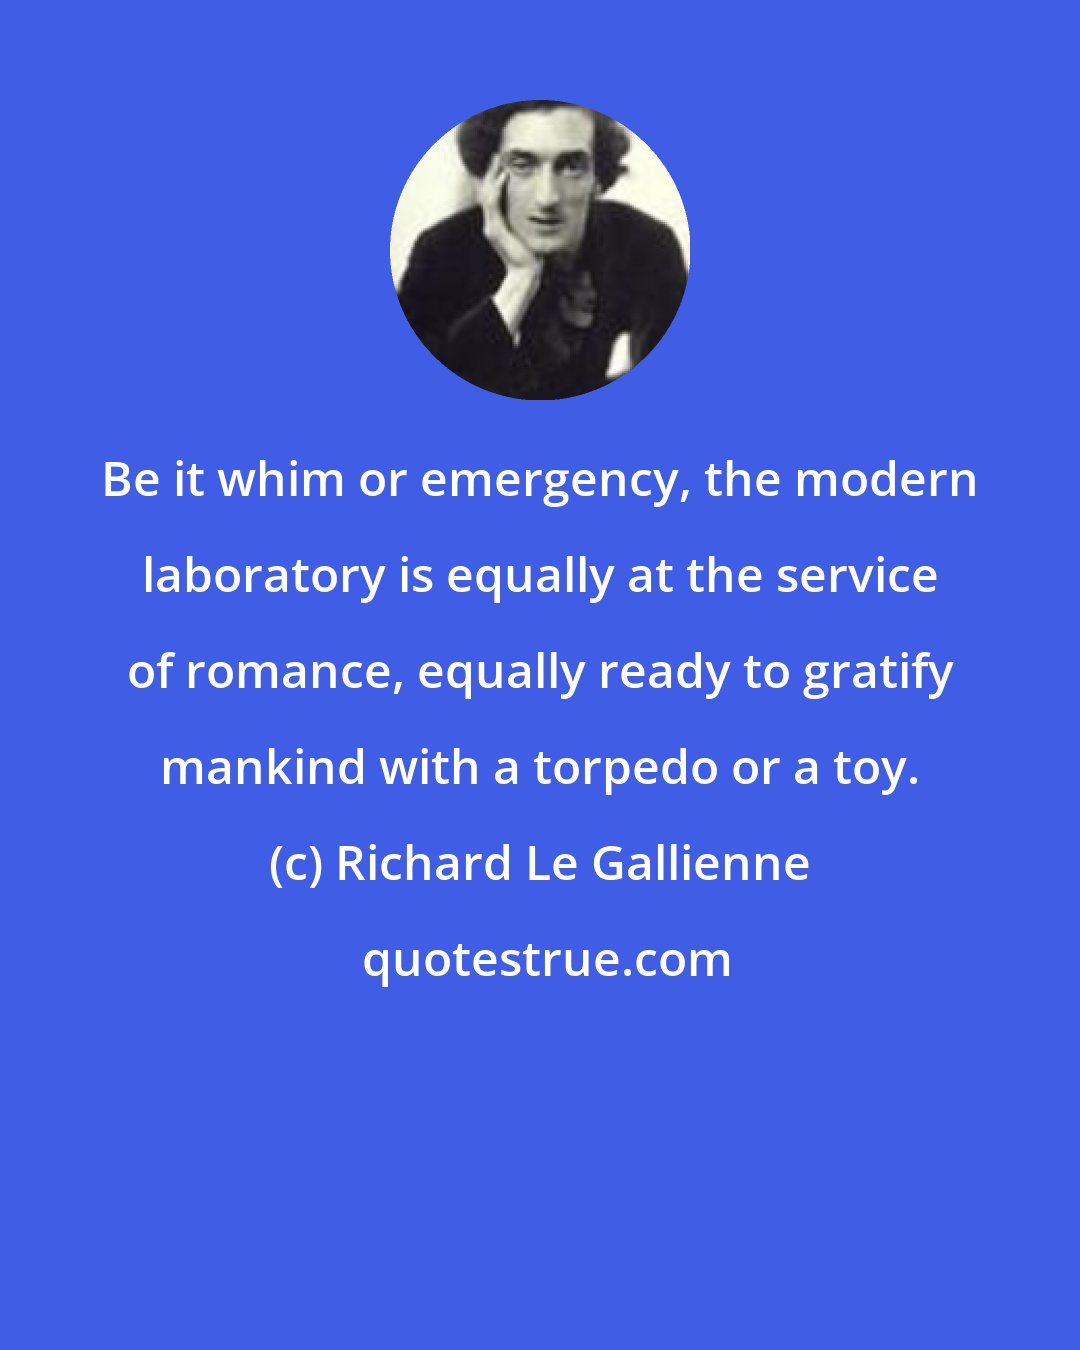 Richard Le Gallienne: Be it whim or emergency, the modern laboratory is equally at the service of romance, equally ready to gratify mankind with a torpedo or a toy.